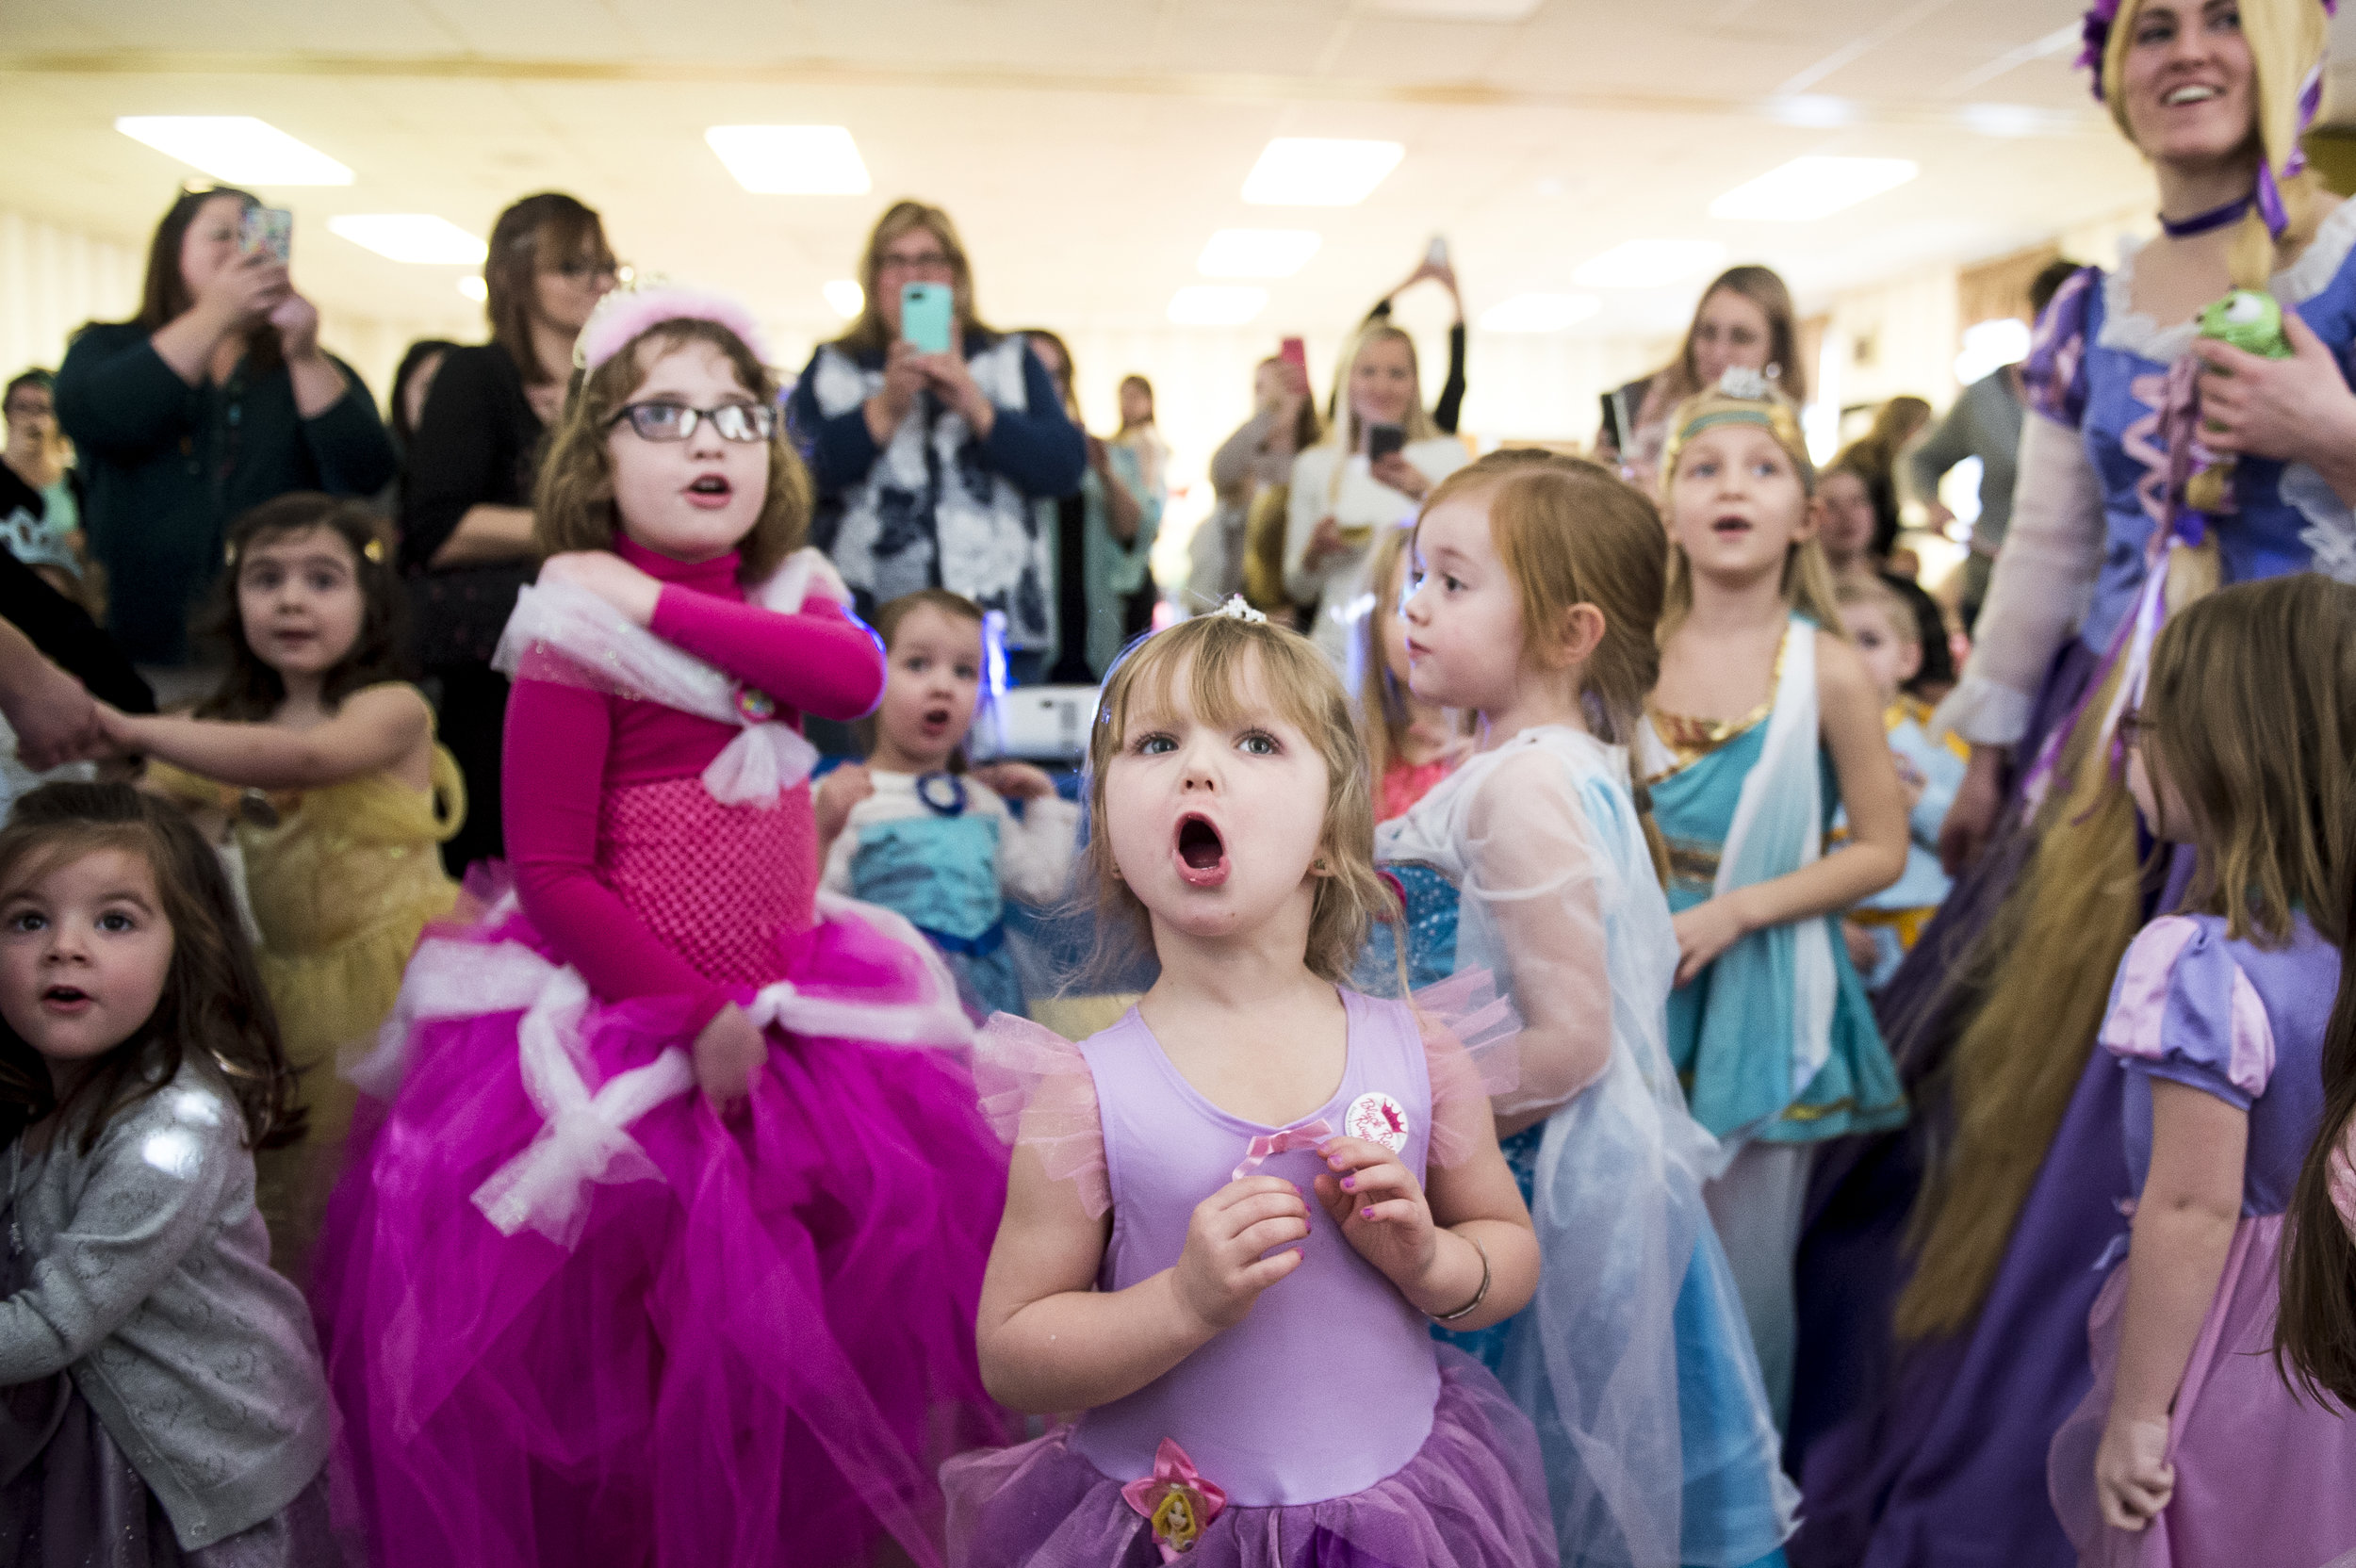  Ellyanna French, 4, sings along to "Let It Go" from Disney's "Frozen" during a princess teatime hosted by the Black Rose Rollers at the Hanover YWCA.&nbsp; 